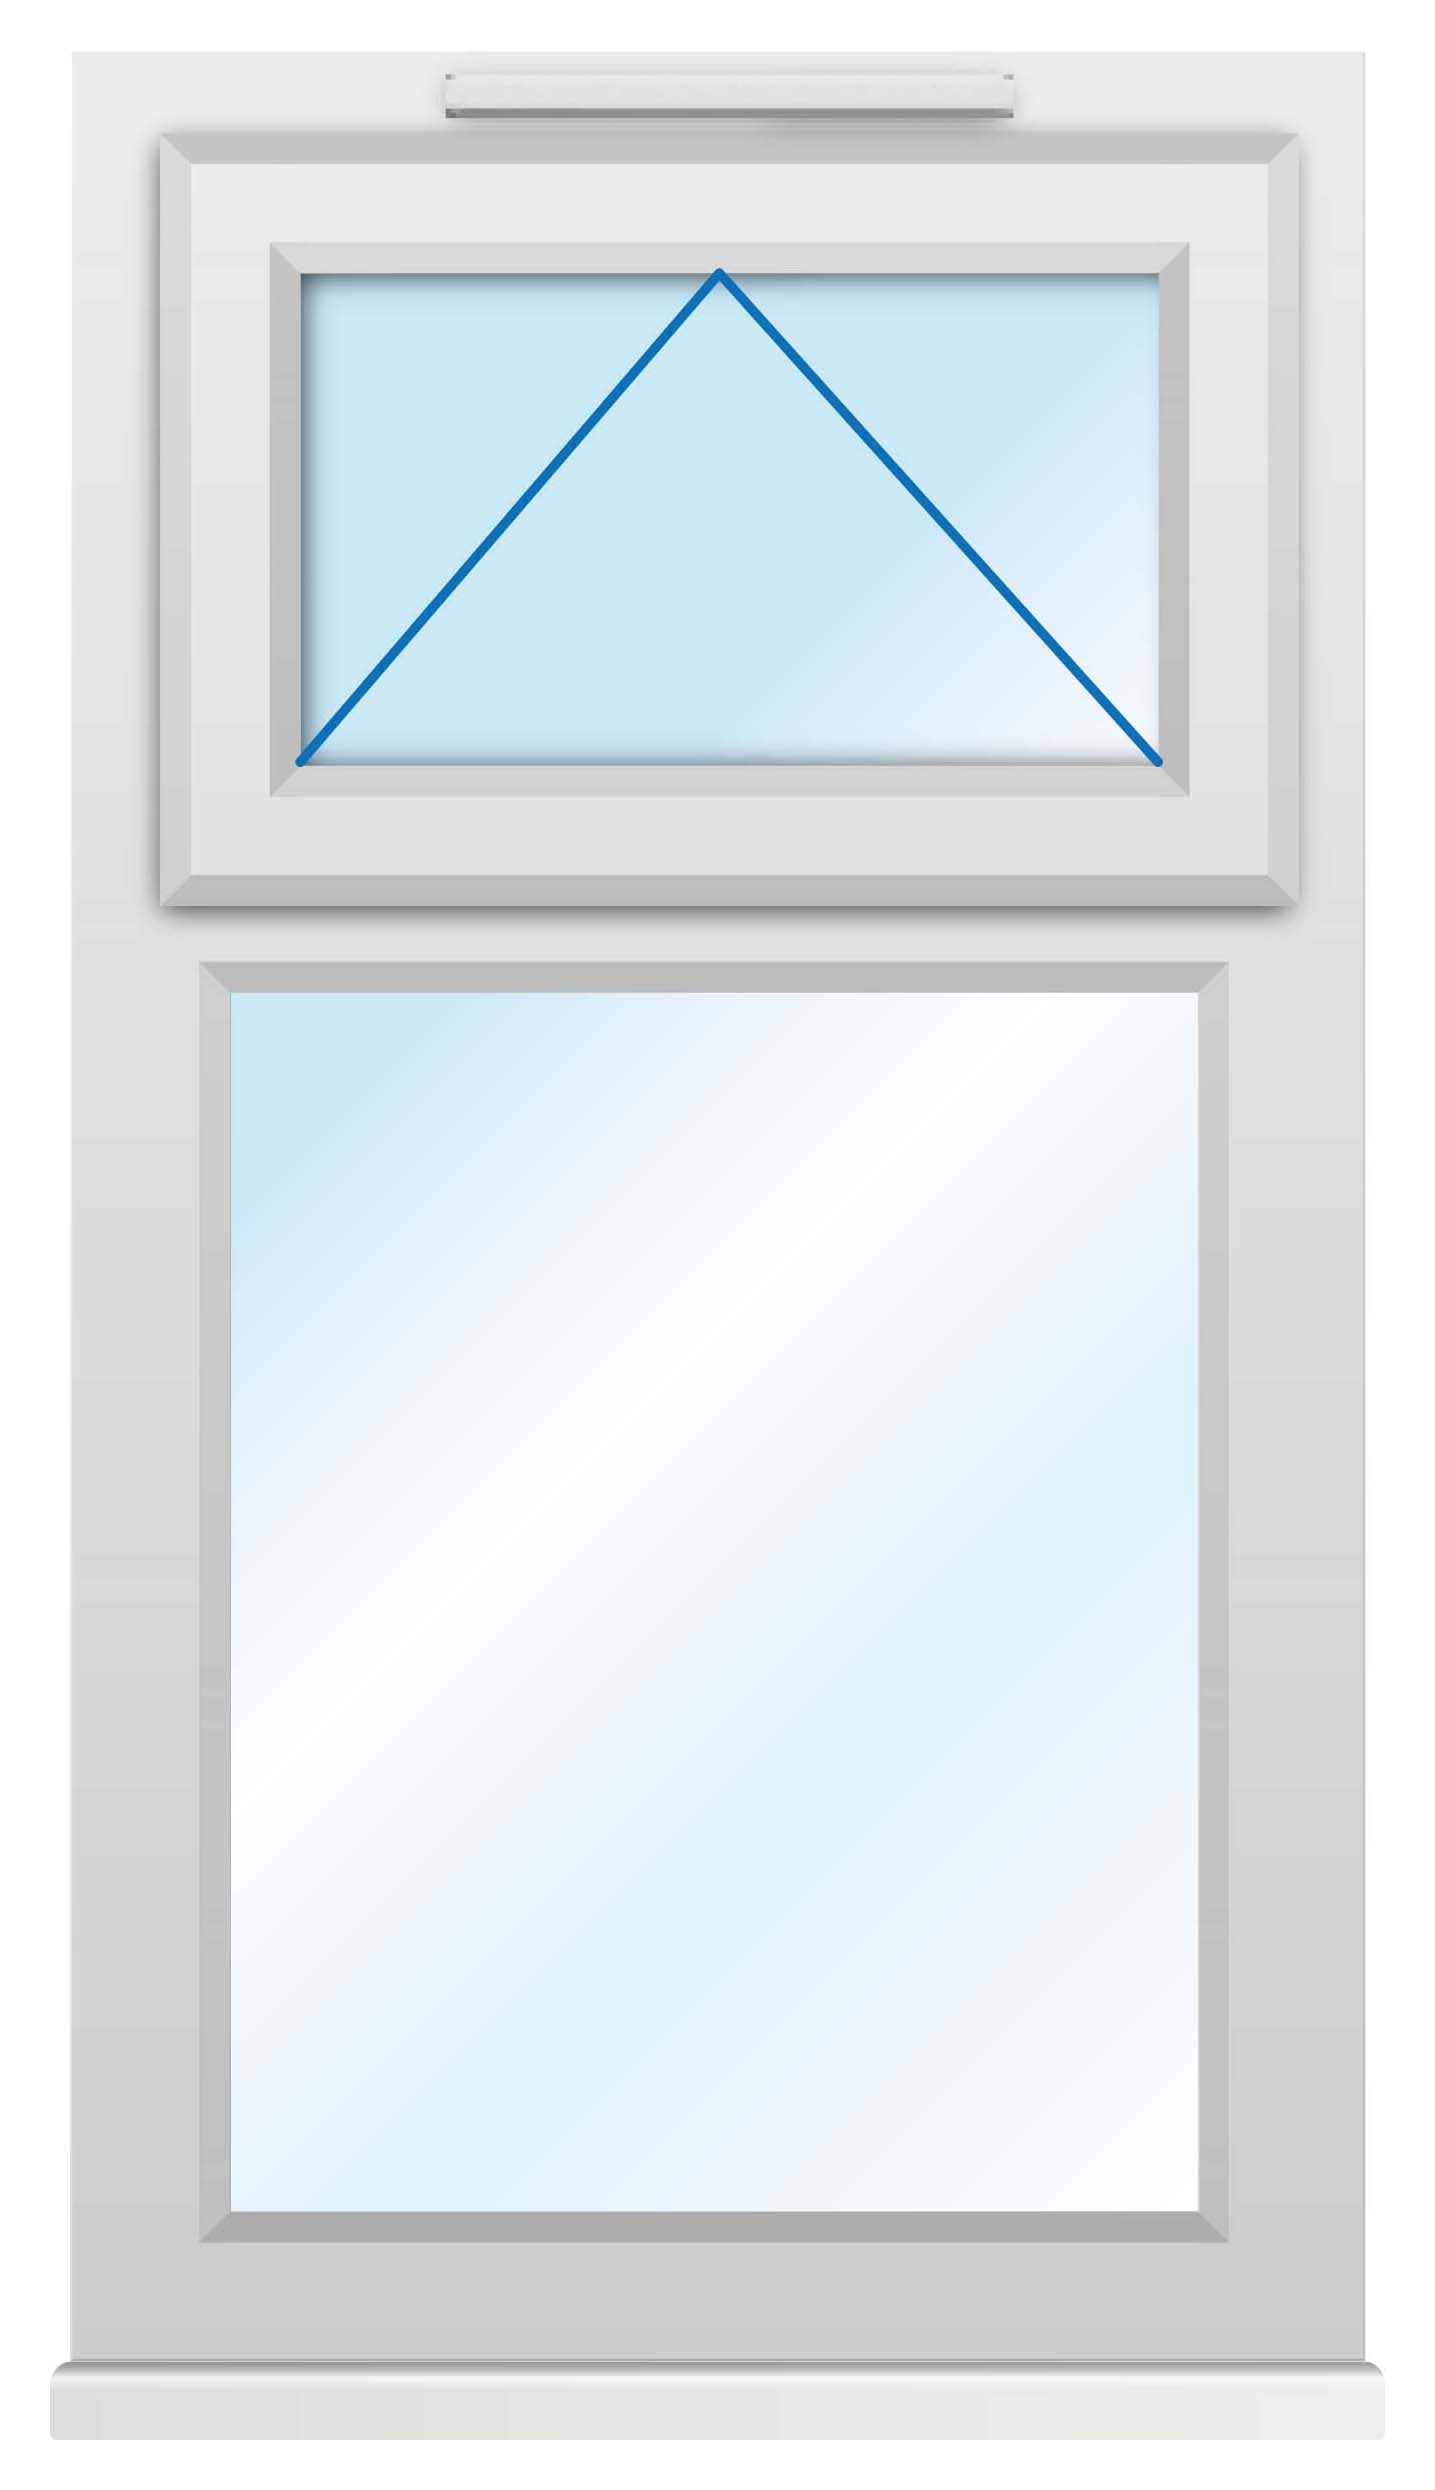 Image of Euramax uPVC White Top Hung Obscure Glass Casement Window - 610 x 1010mm